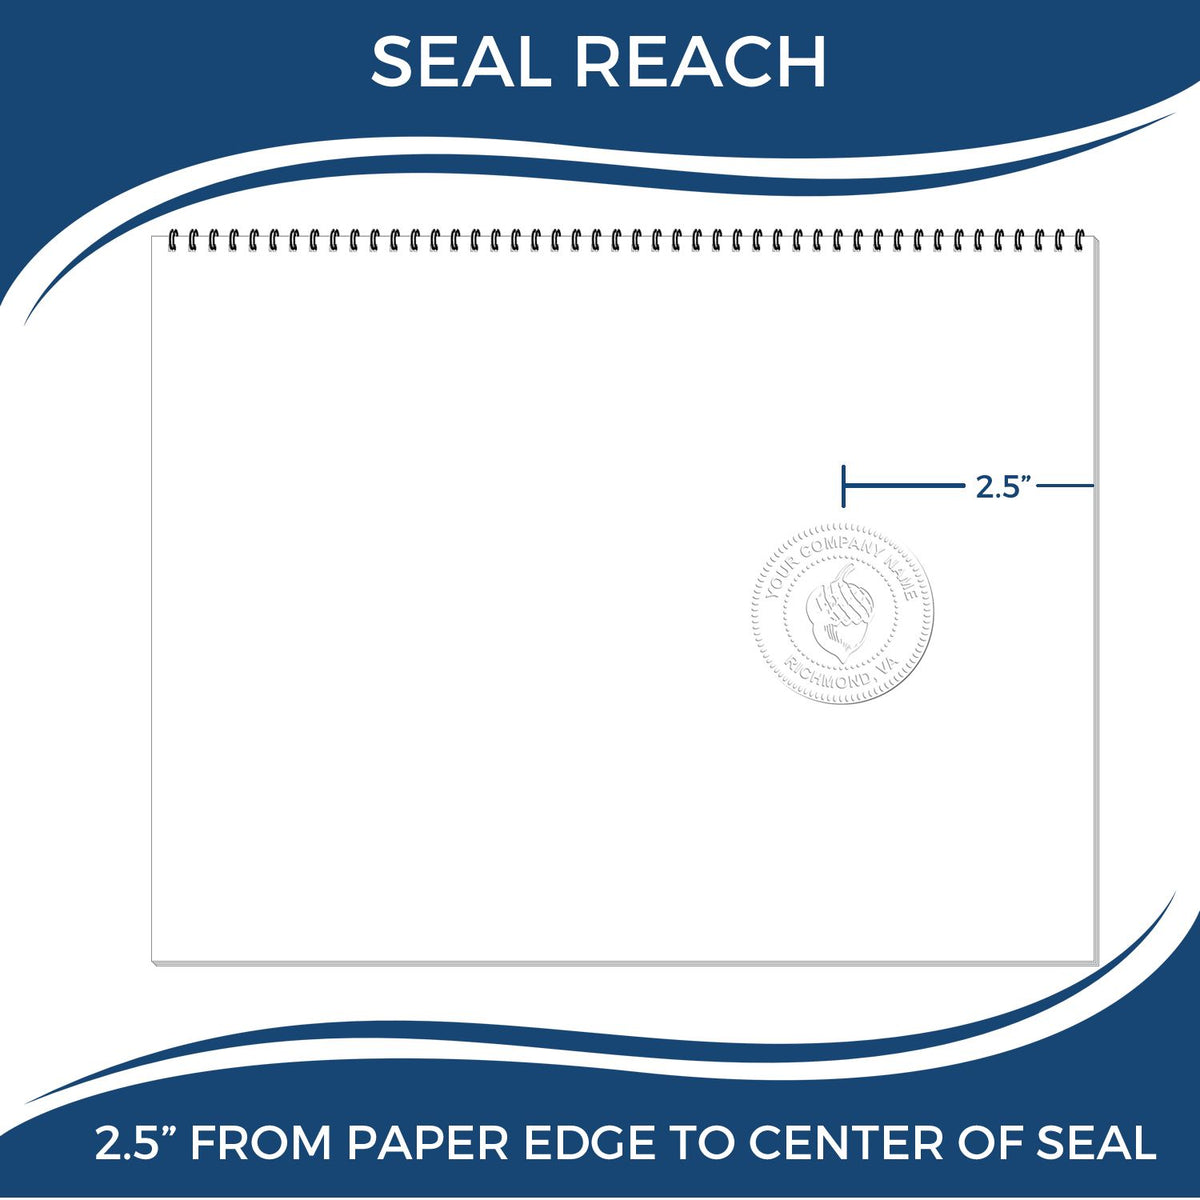 An infographic showing the seal reach which is represented by a ruler and a miniature seal image of the Heavy Duty Cast Iron New Jersey Geologist Seal Embosser